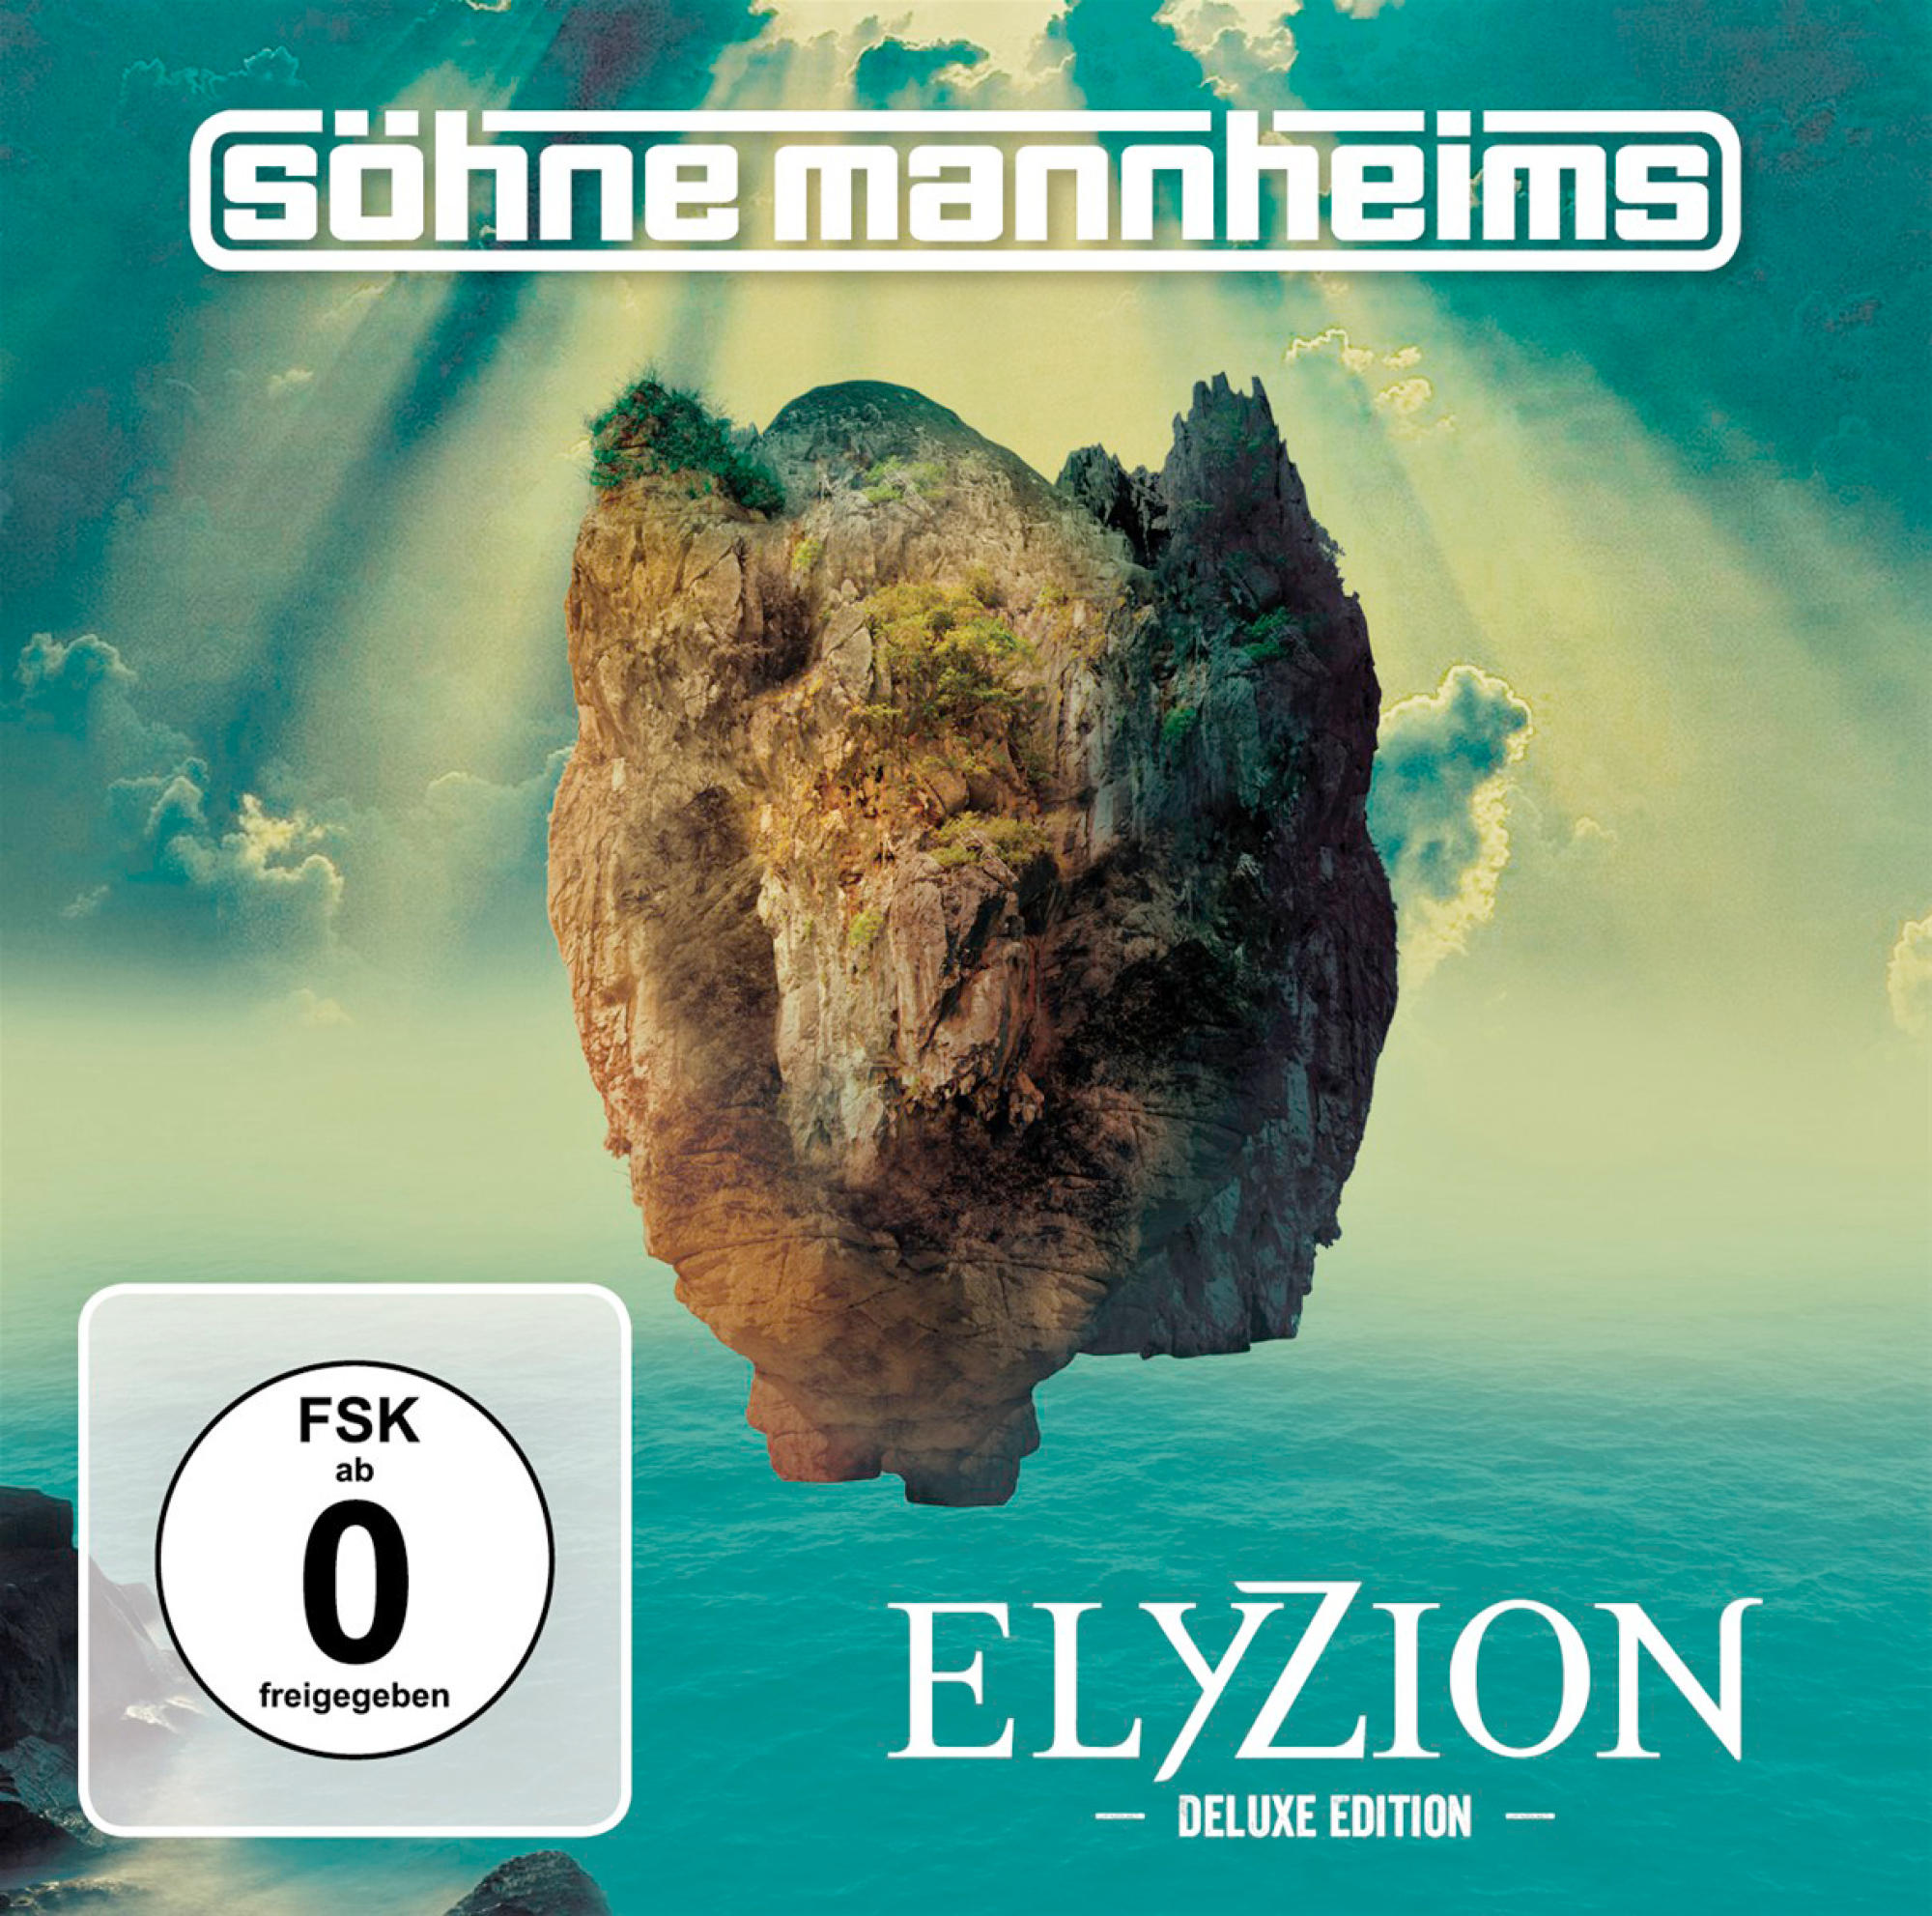 Söhne Mannheims - (Deluxe + Elyzion DVD Audio) Edition) - (CD